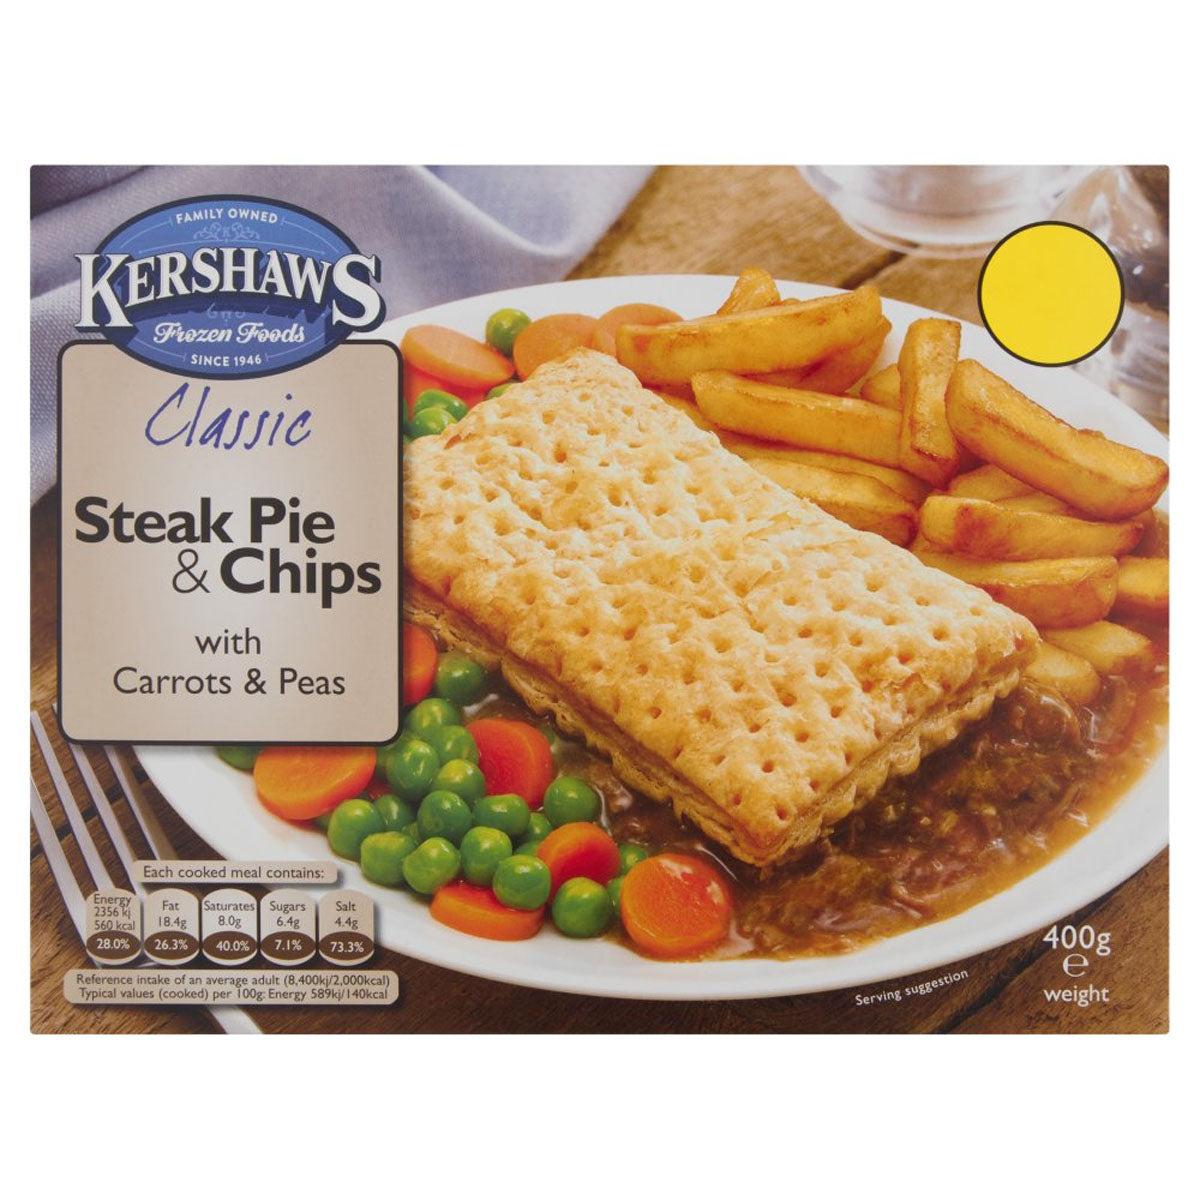 Kershaws - Classic Steak Pie & Chips with Carrots & Peas - 400g - Continental Food Store